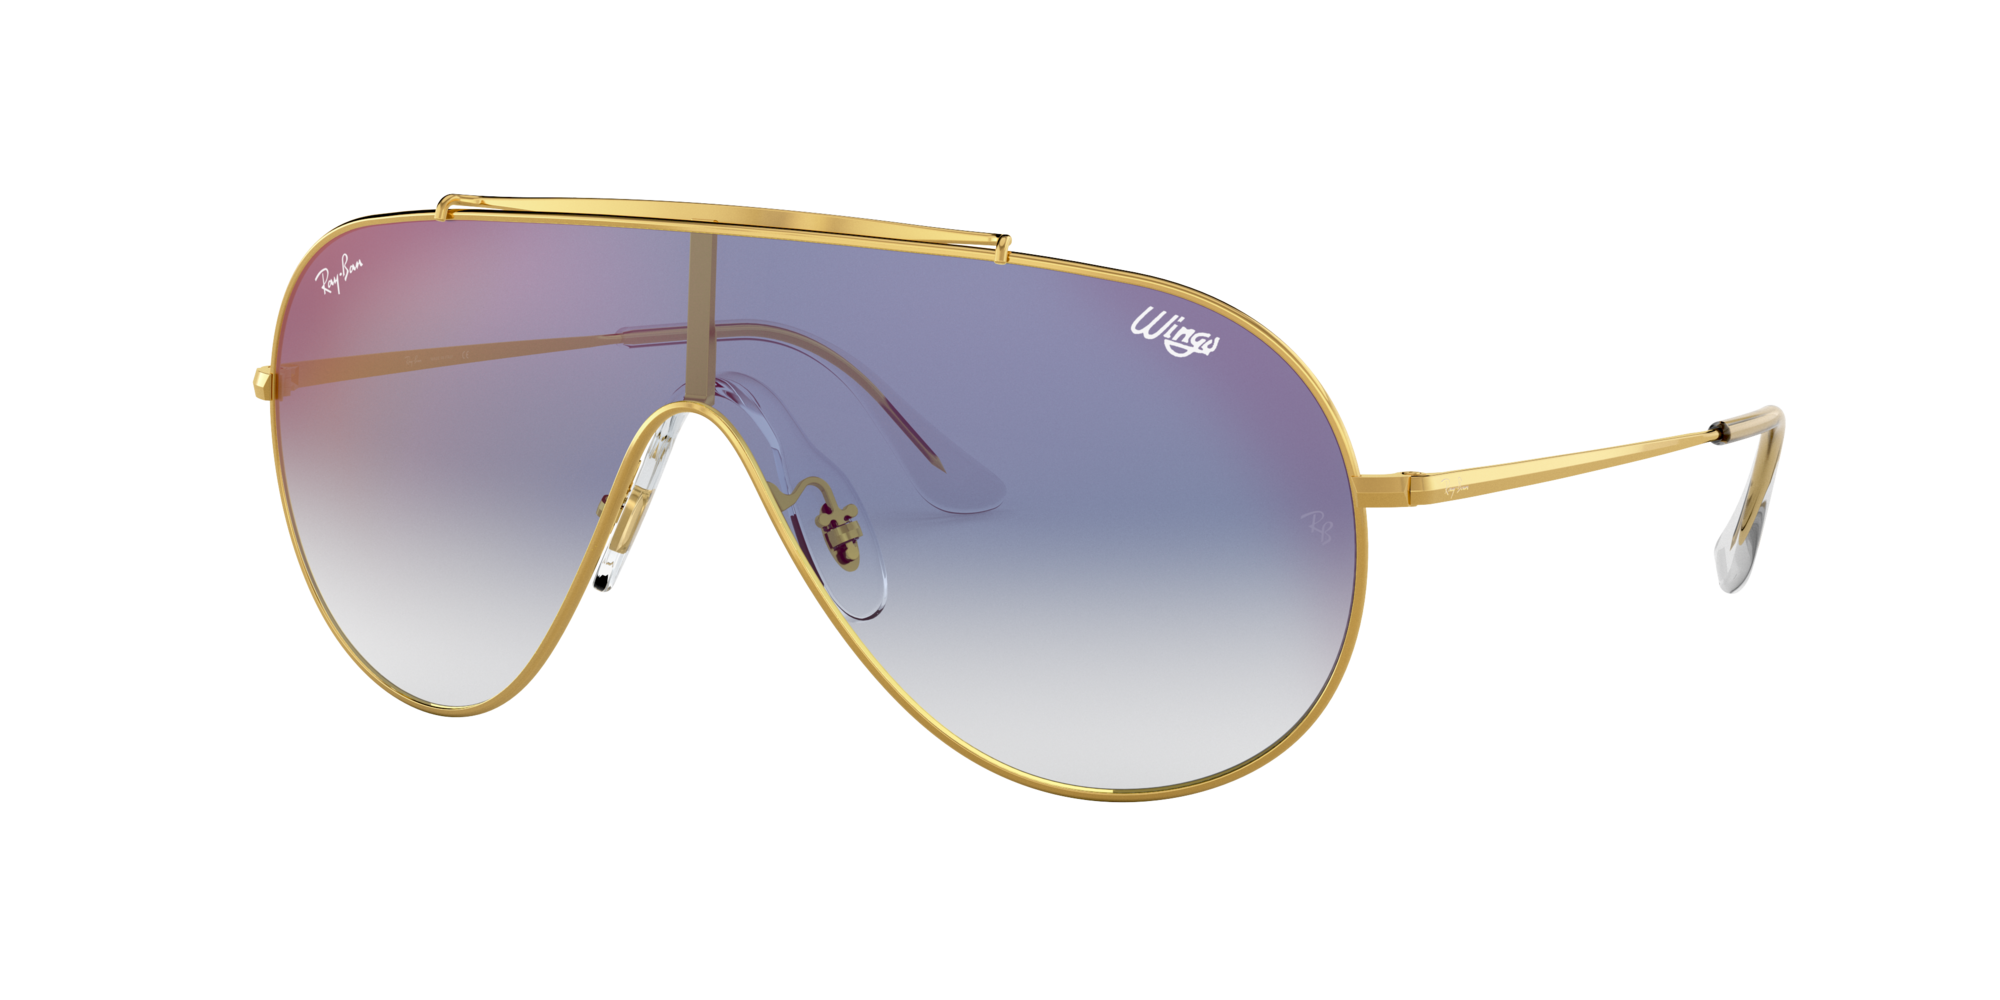 Ray-Ban RB3597 WINGS 01 Blue Gradient 